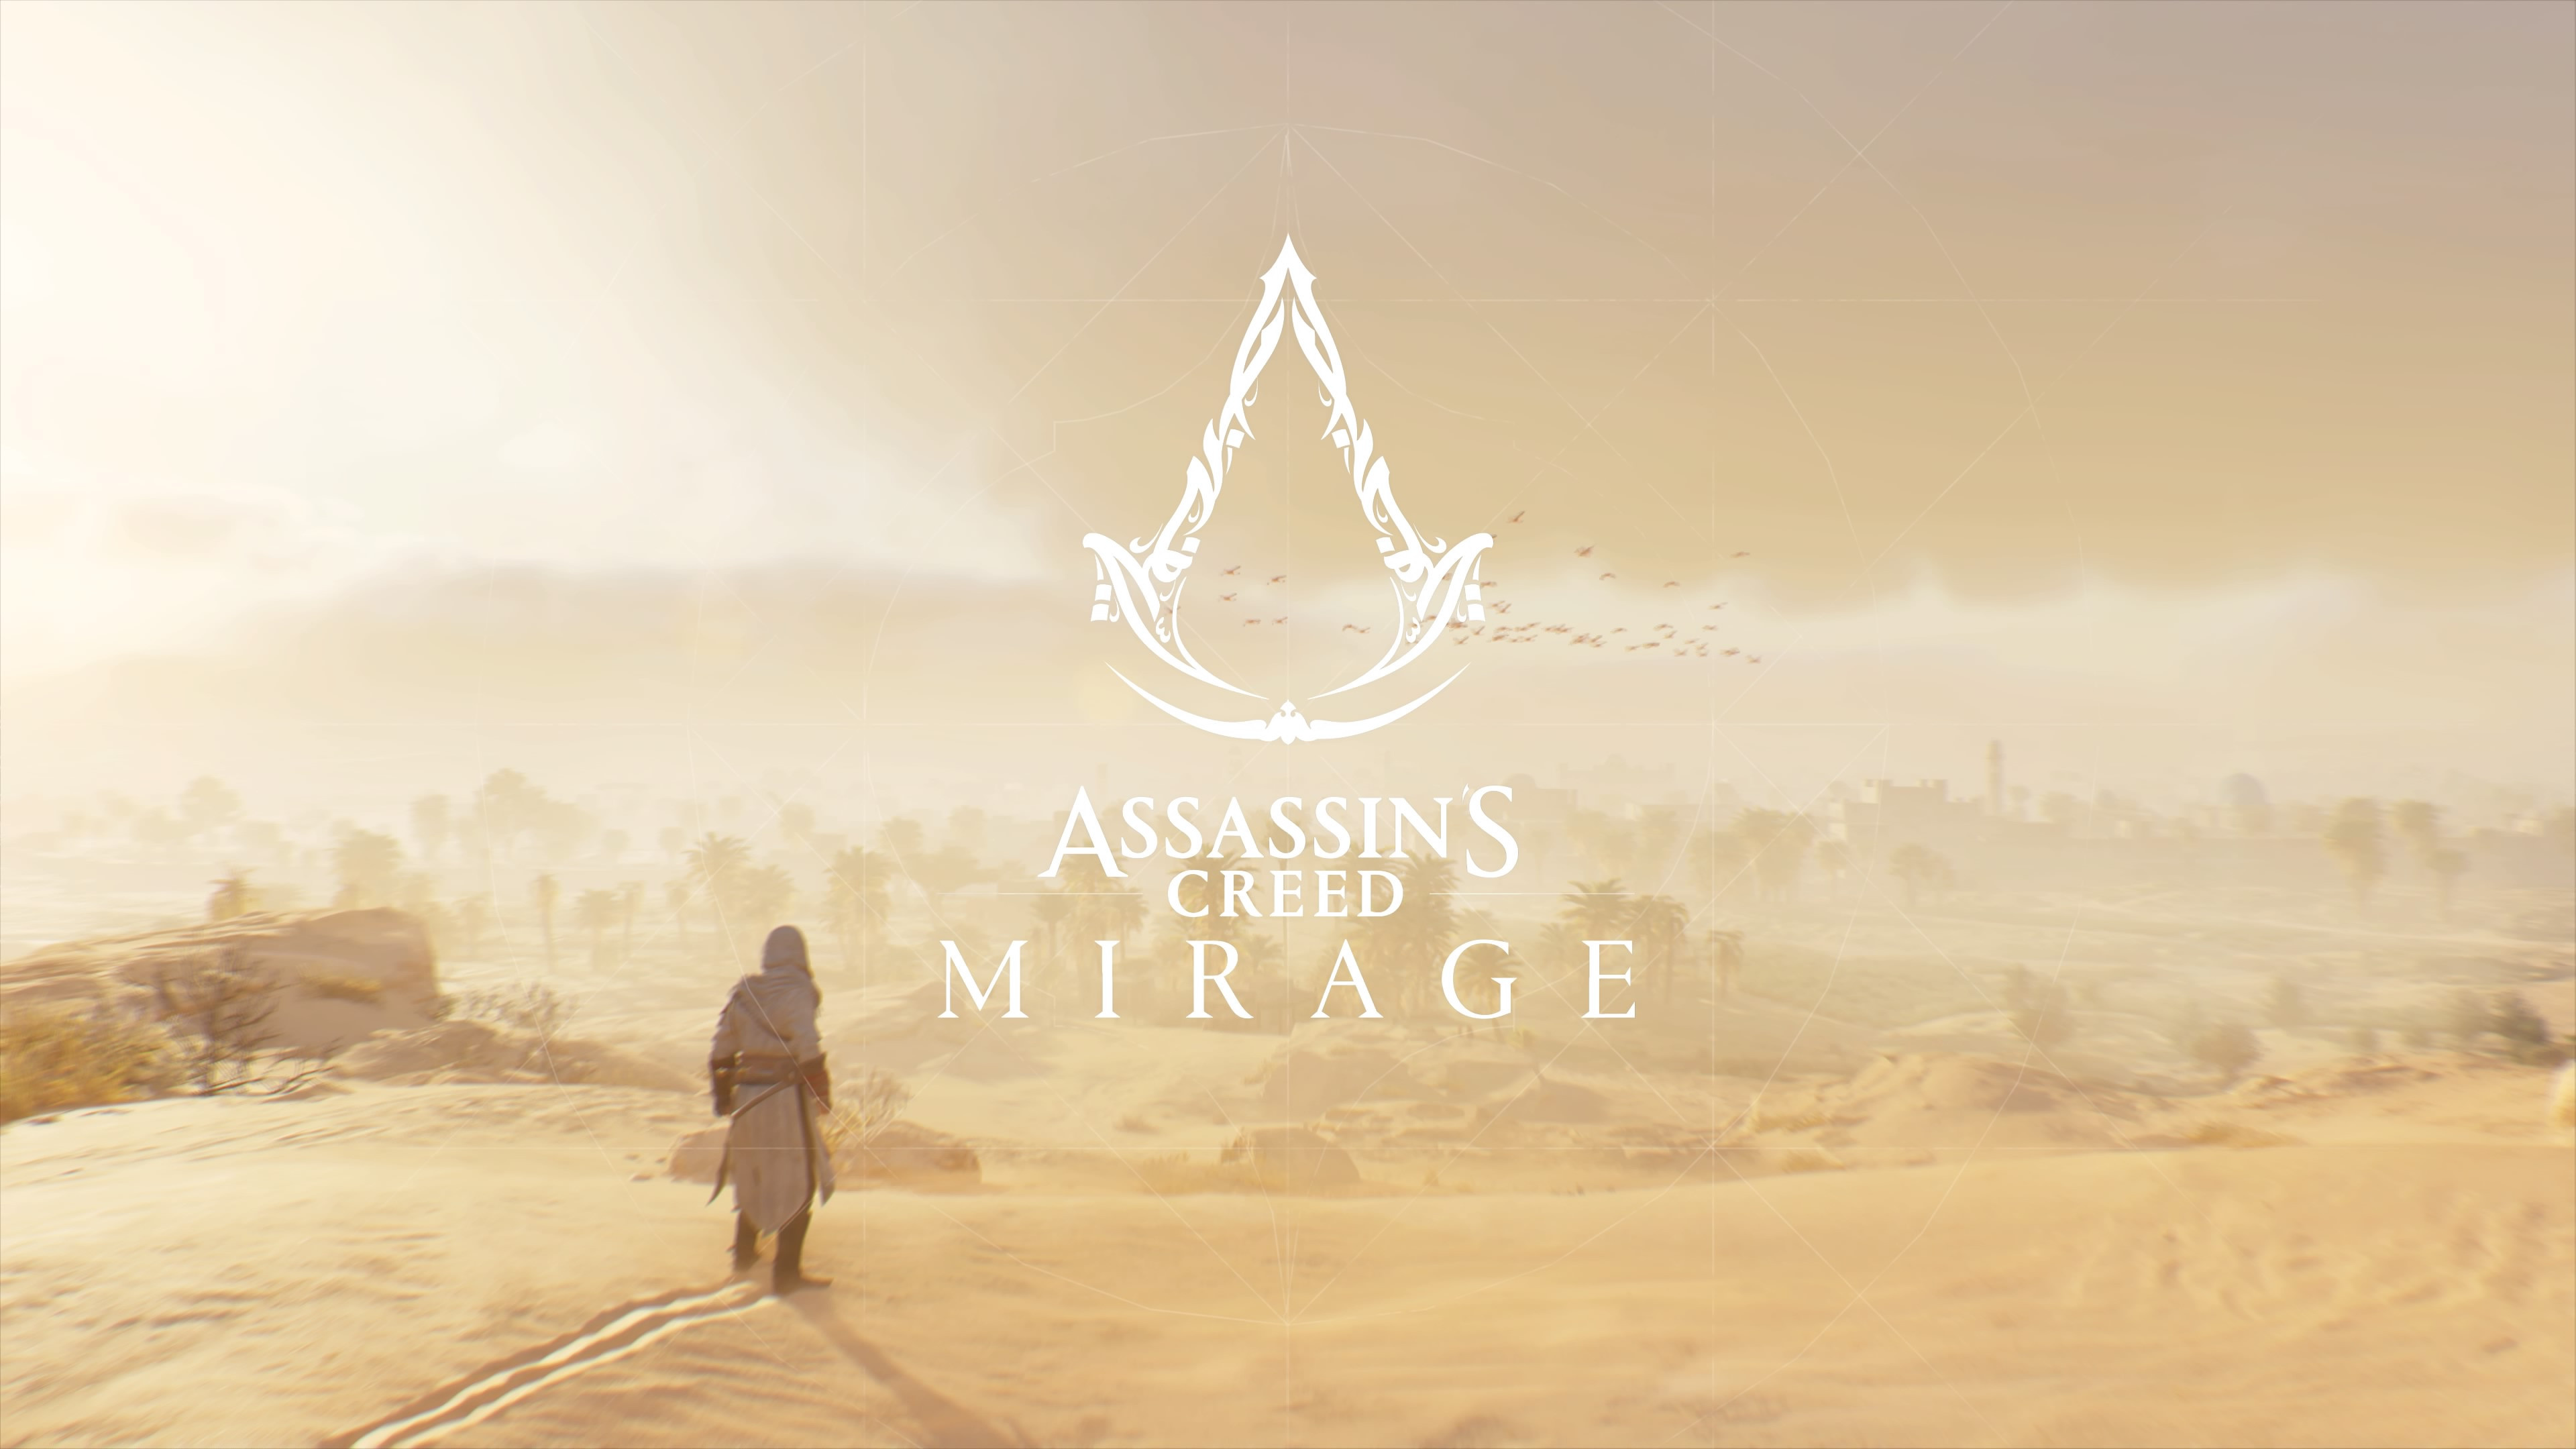 A complete Assassin's Creed Mirage guide to become a Hidden One